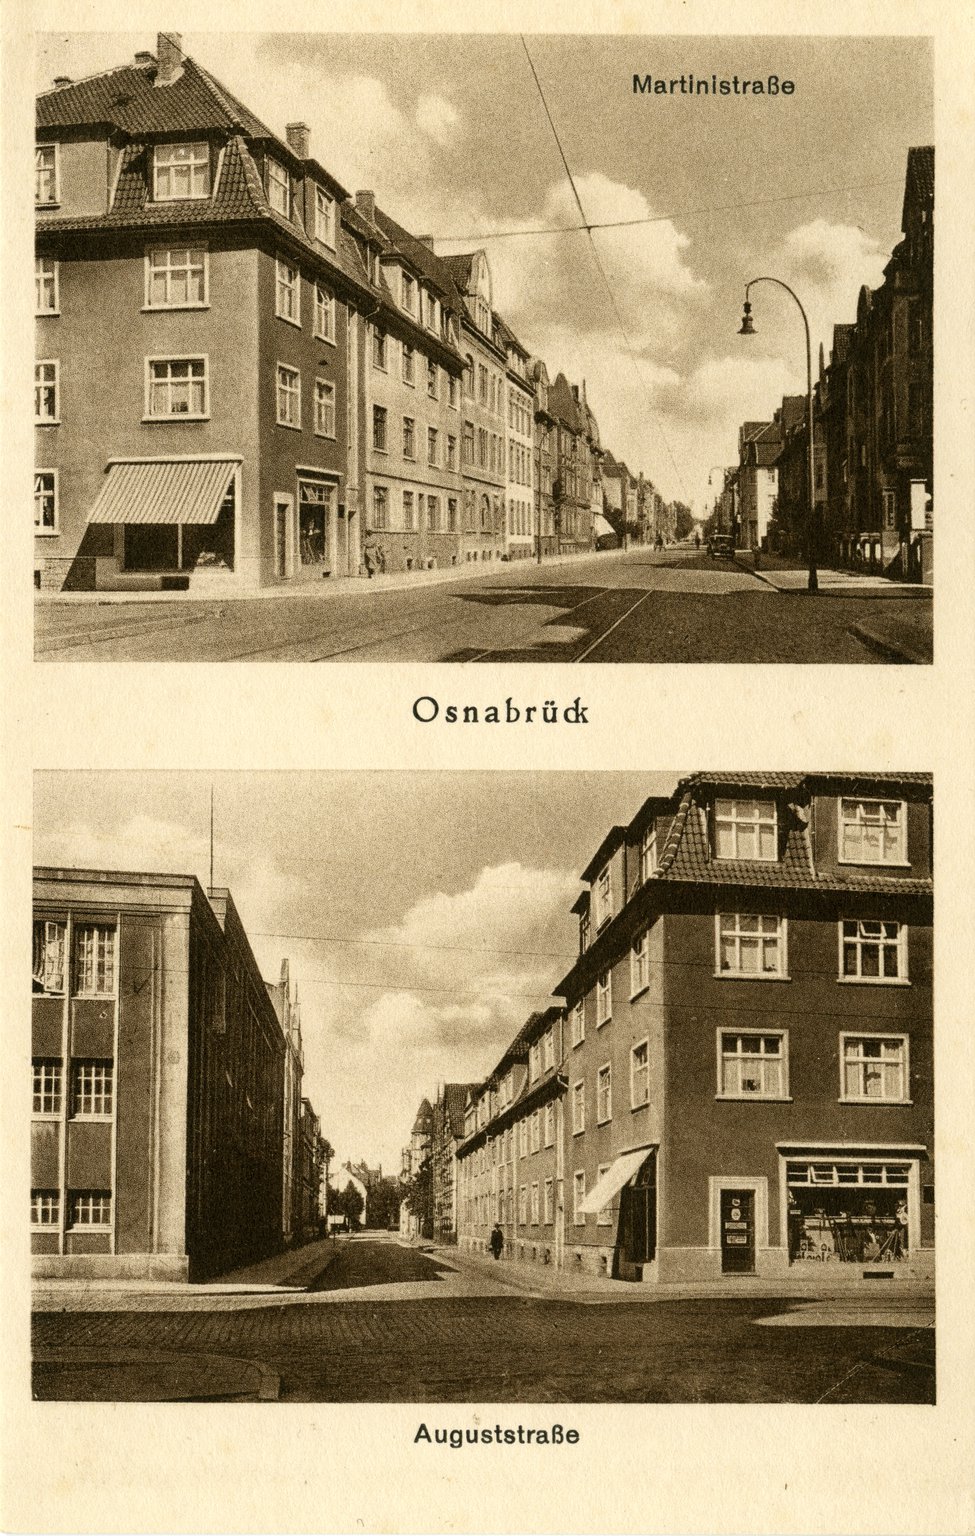 A postcard of Osnabrück, 1930s. The Van Pels family lived at Martinistraße 67a from 1930 until their departure for Amsterdam in 1937.